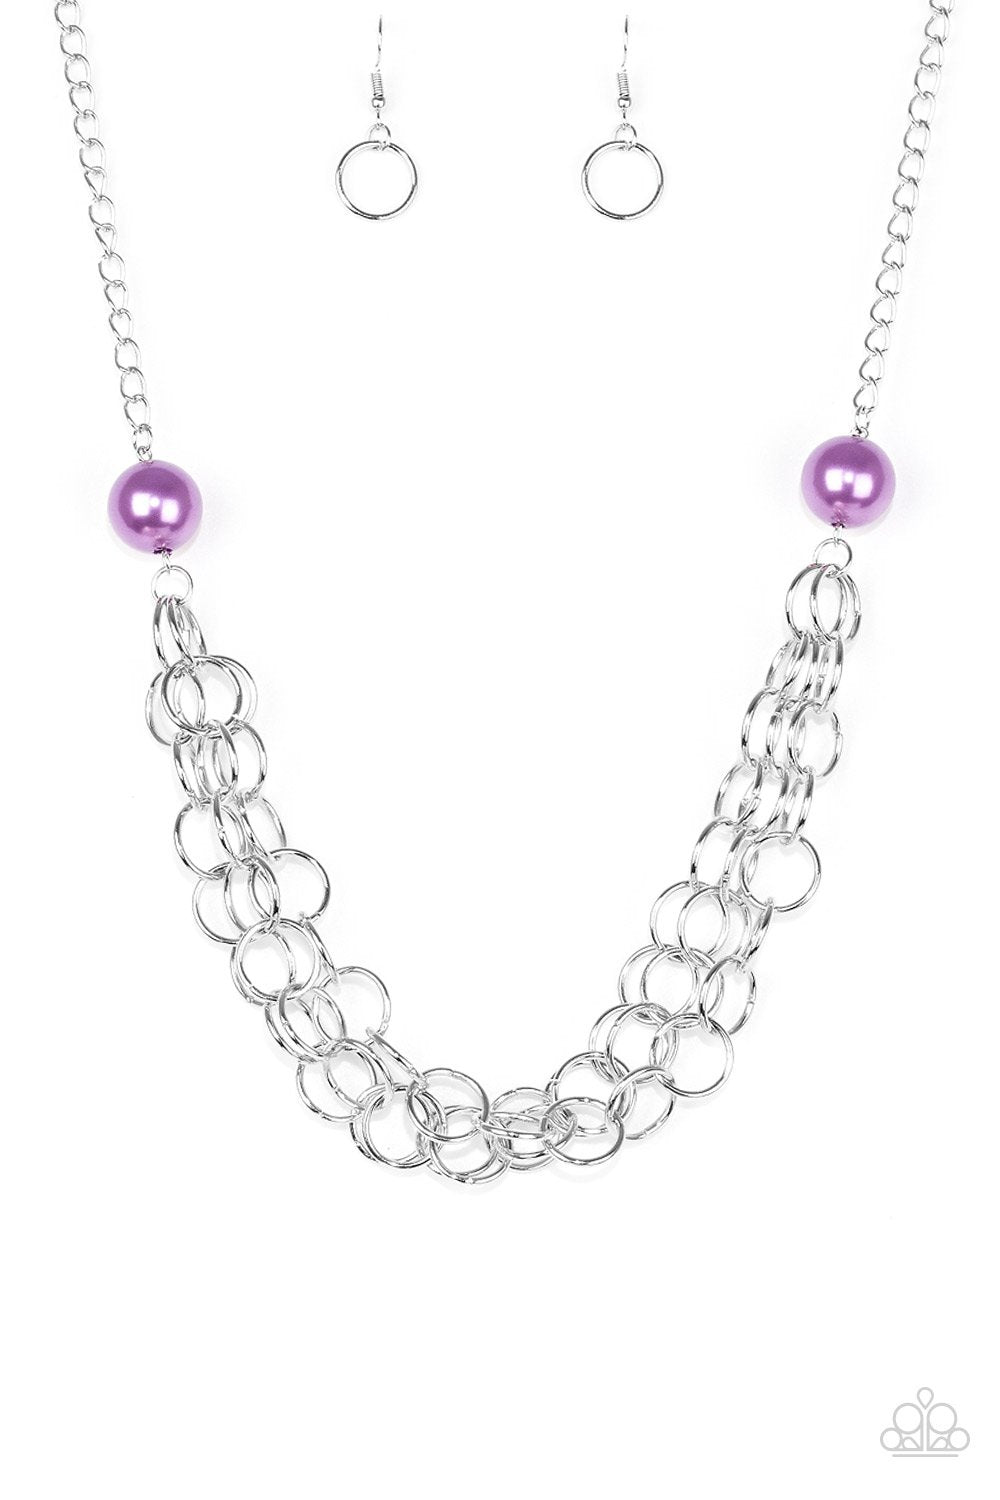 Daring Diva Purple and Silver Necklace - Paparazzi Accessories - Gtdazzlequeen